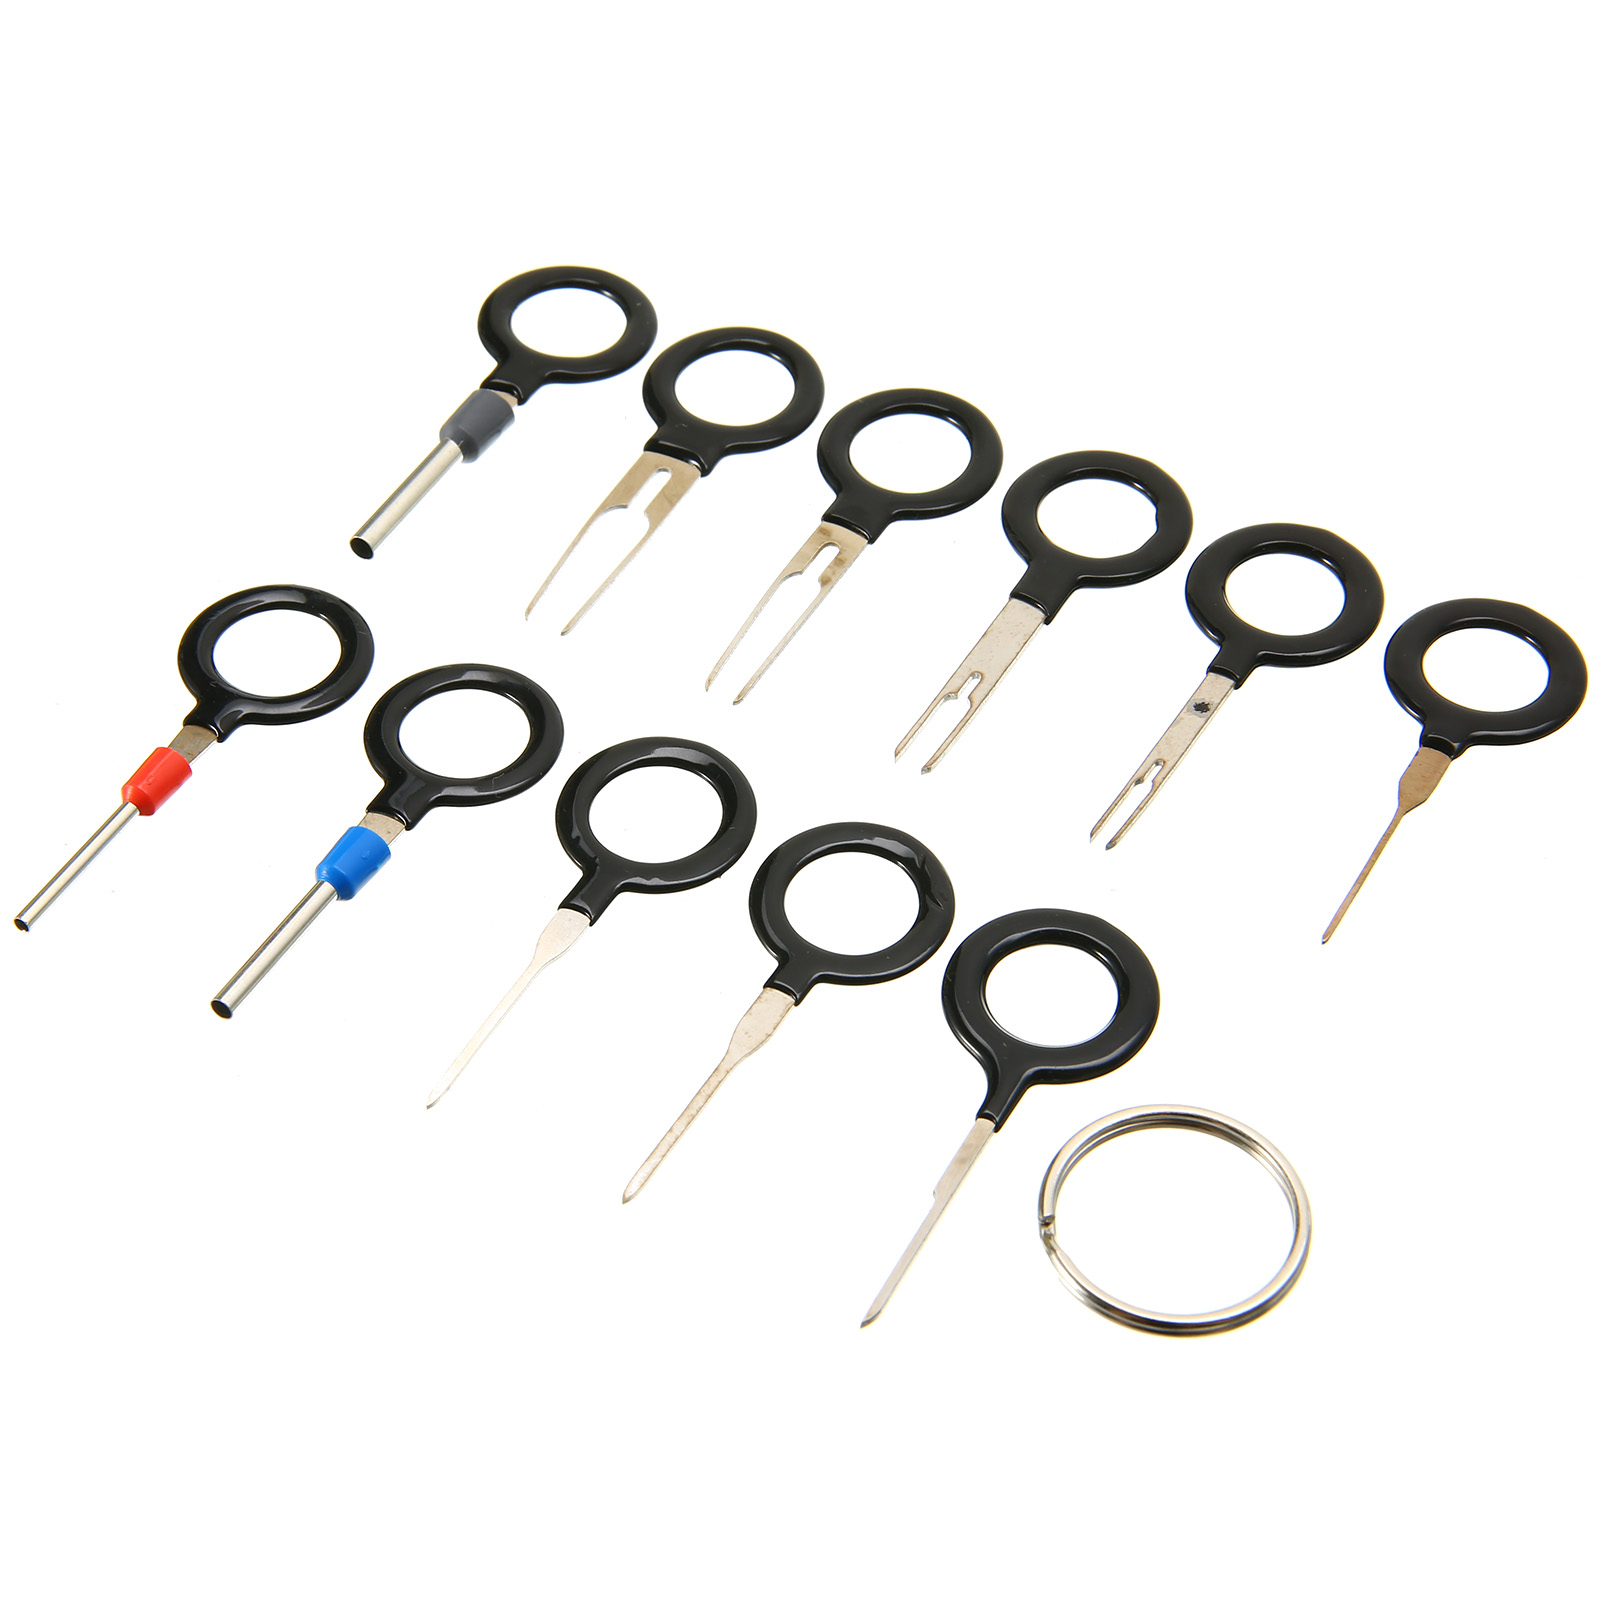 11pcs/set Terminal Removal Tool Key Pin Wire Crimp Connector Pin Extractor Kit Car Electrical Key Tools